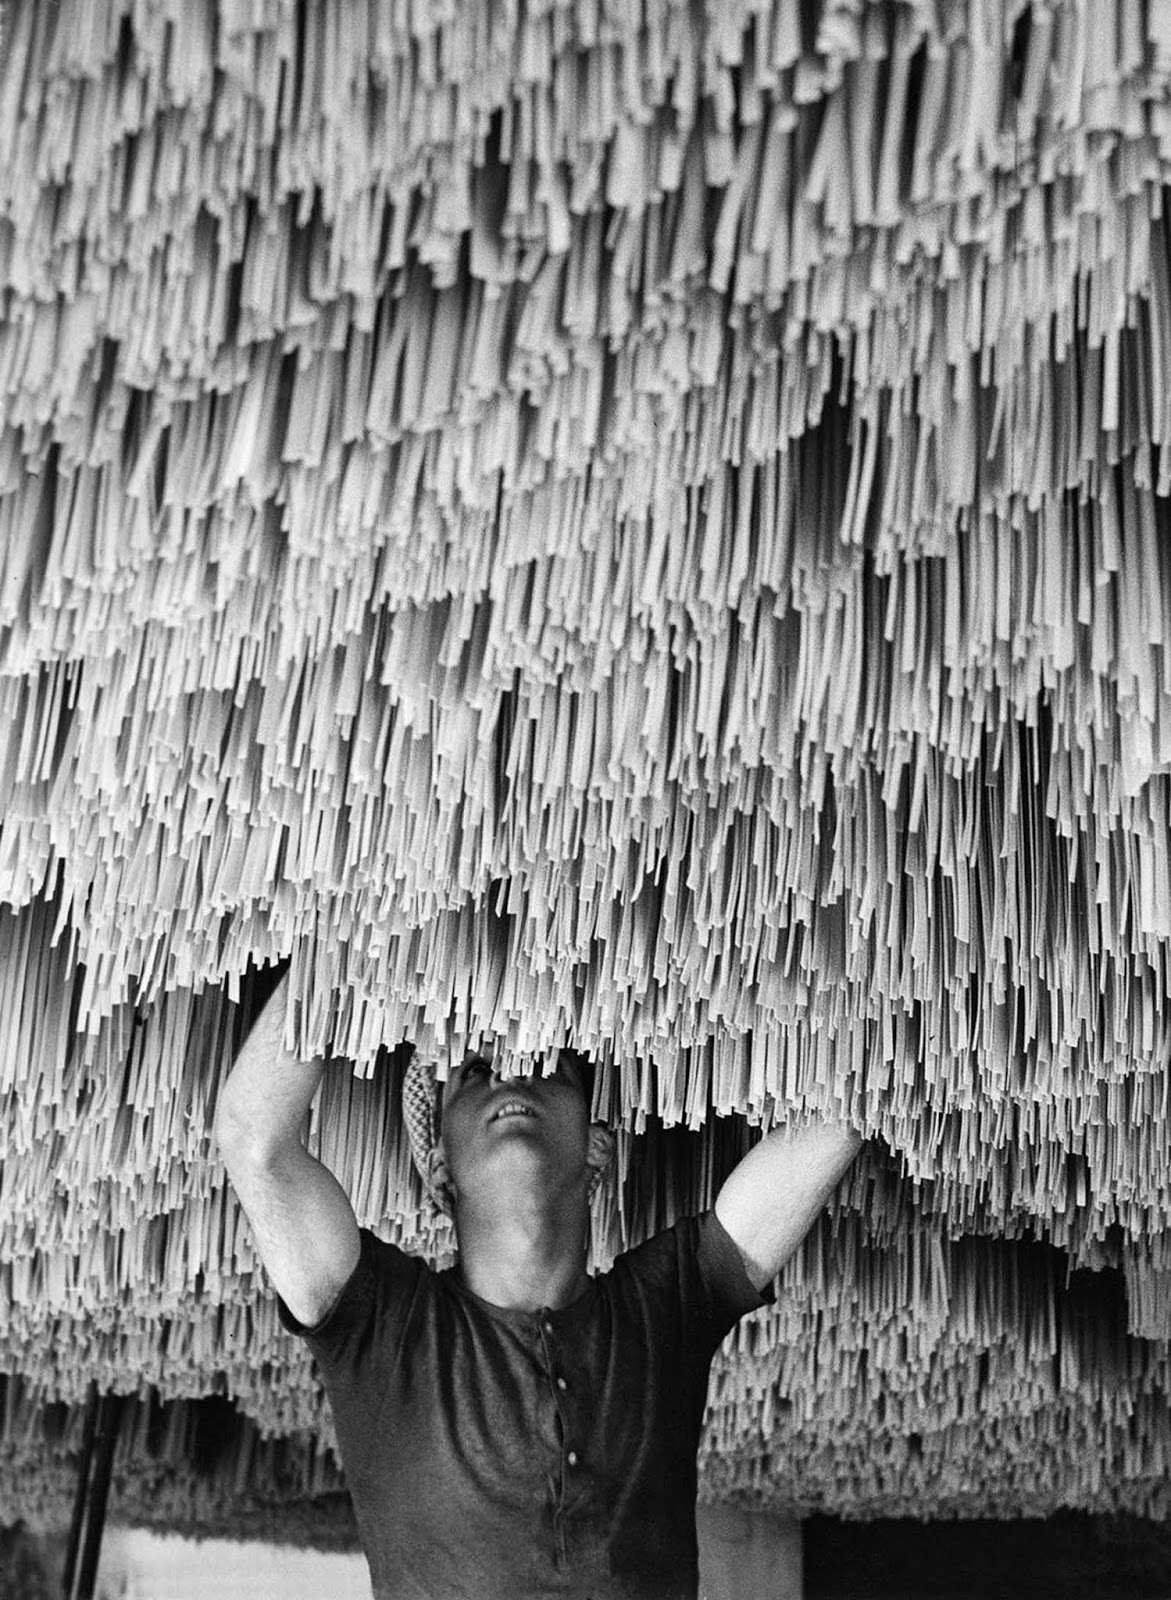 A worker hangs pasta to dry in a factory in Italy. 1932.